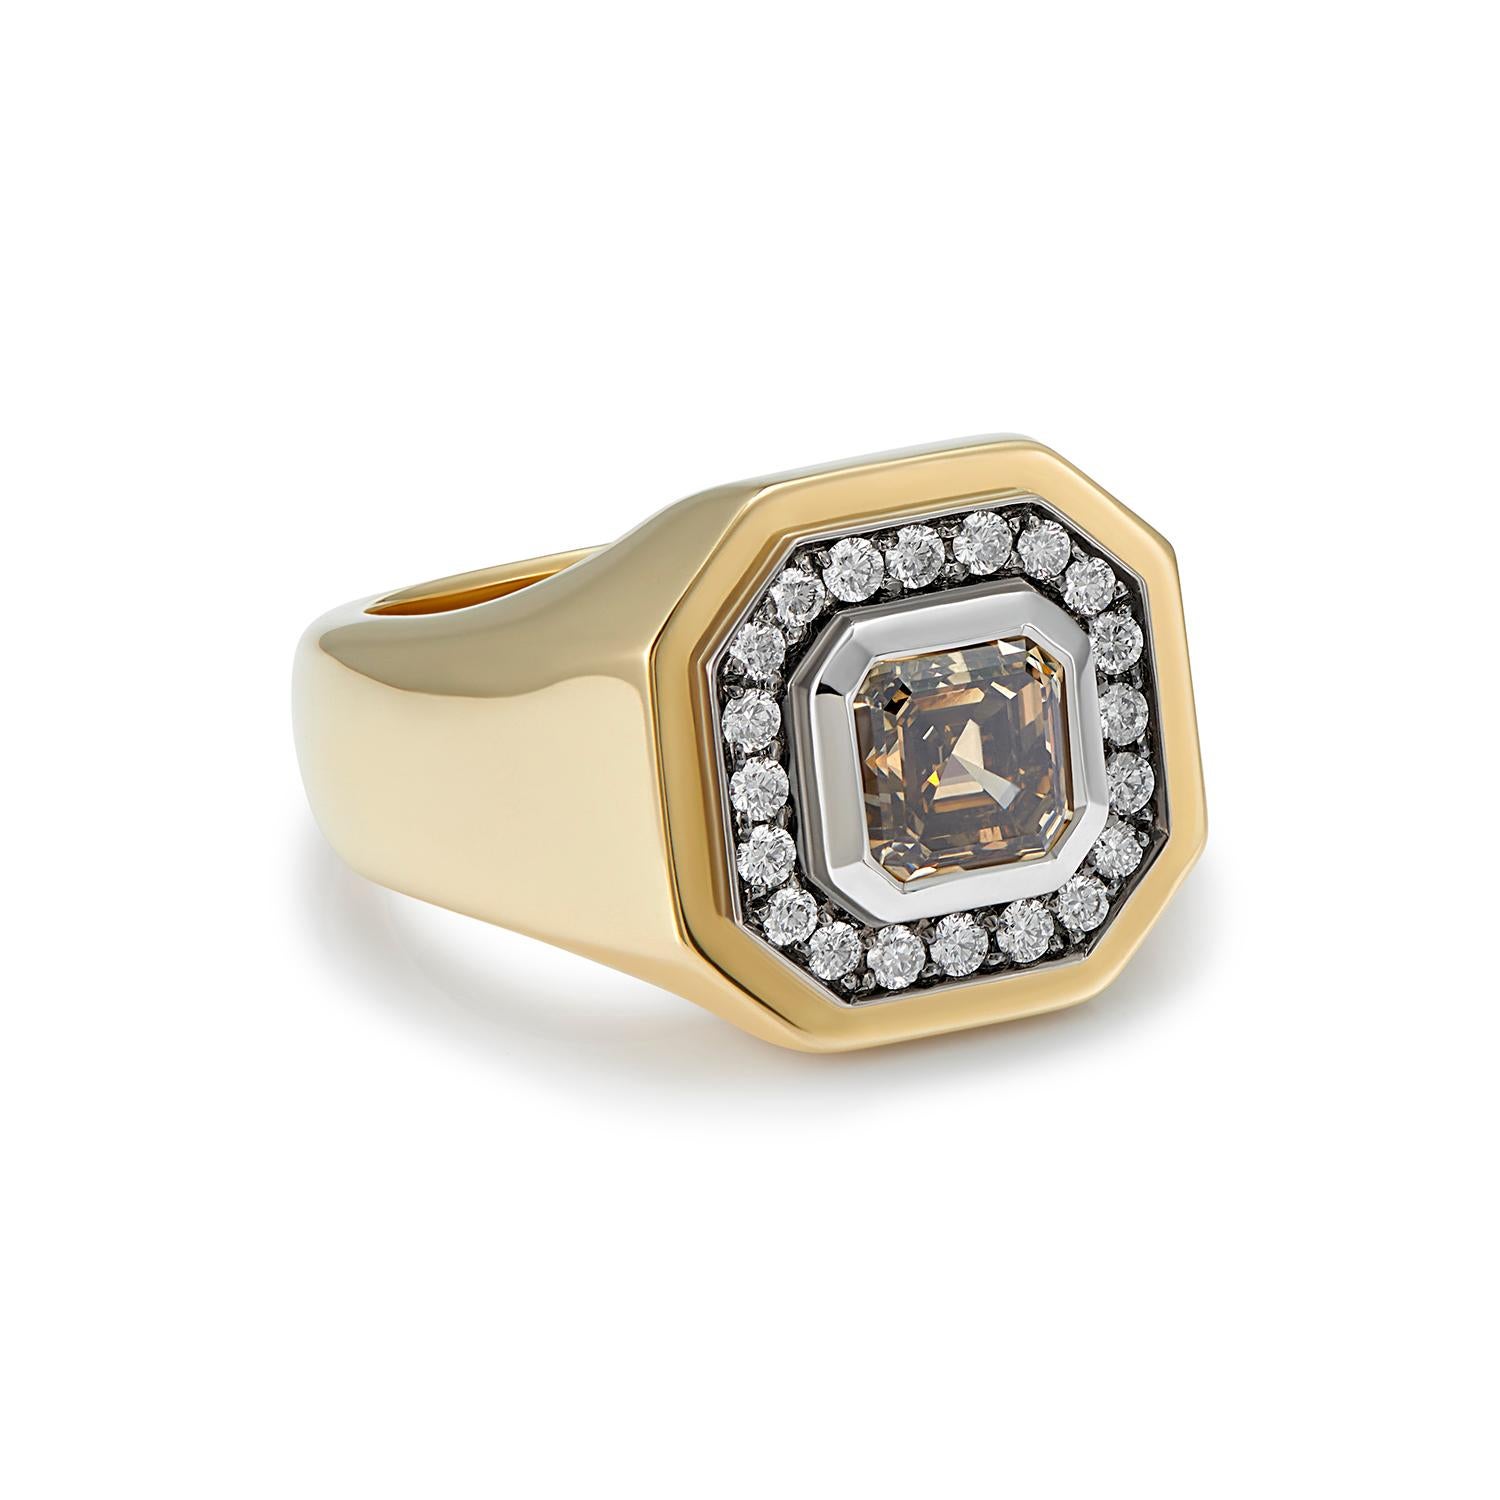 1.24ct Octagonal cut Cognac Brown Diamond
0.54ct White Diamonds
18k Yellow Gold 

A rather special ring, perfect for those wanting something a little bit different for an engagement ring.

This statement ring is set with an octagonal cut cognac